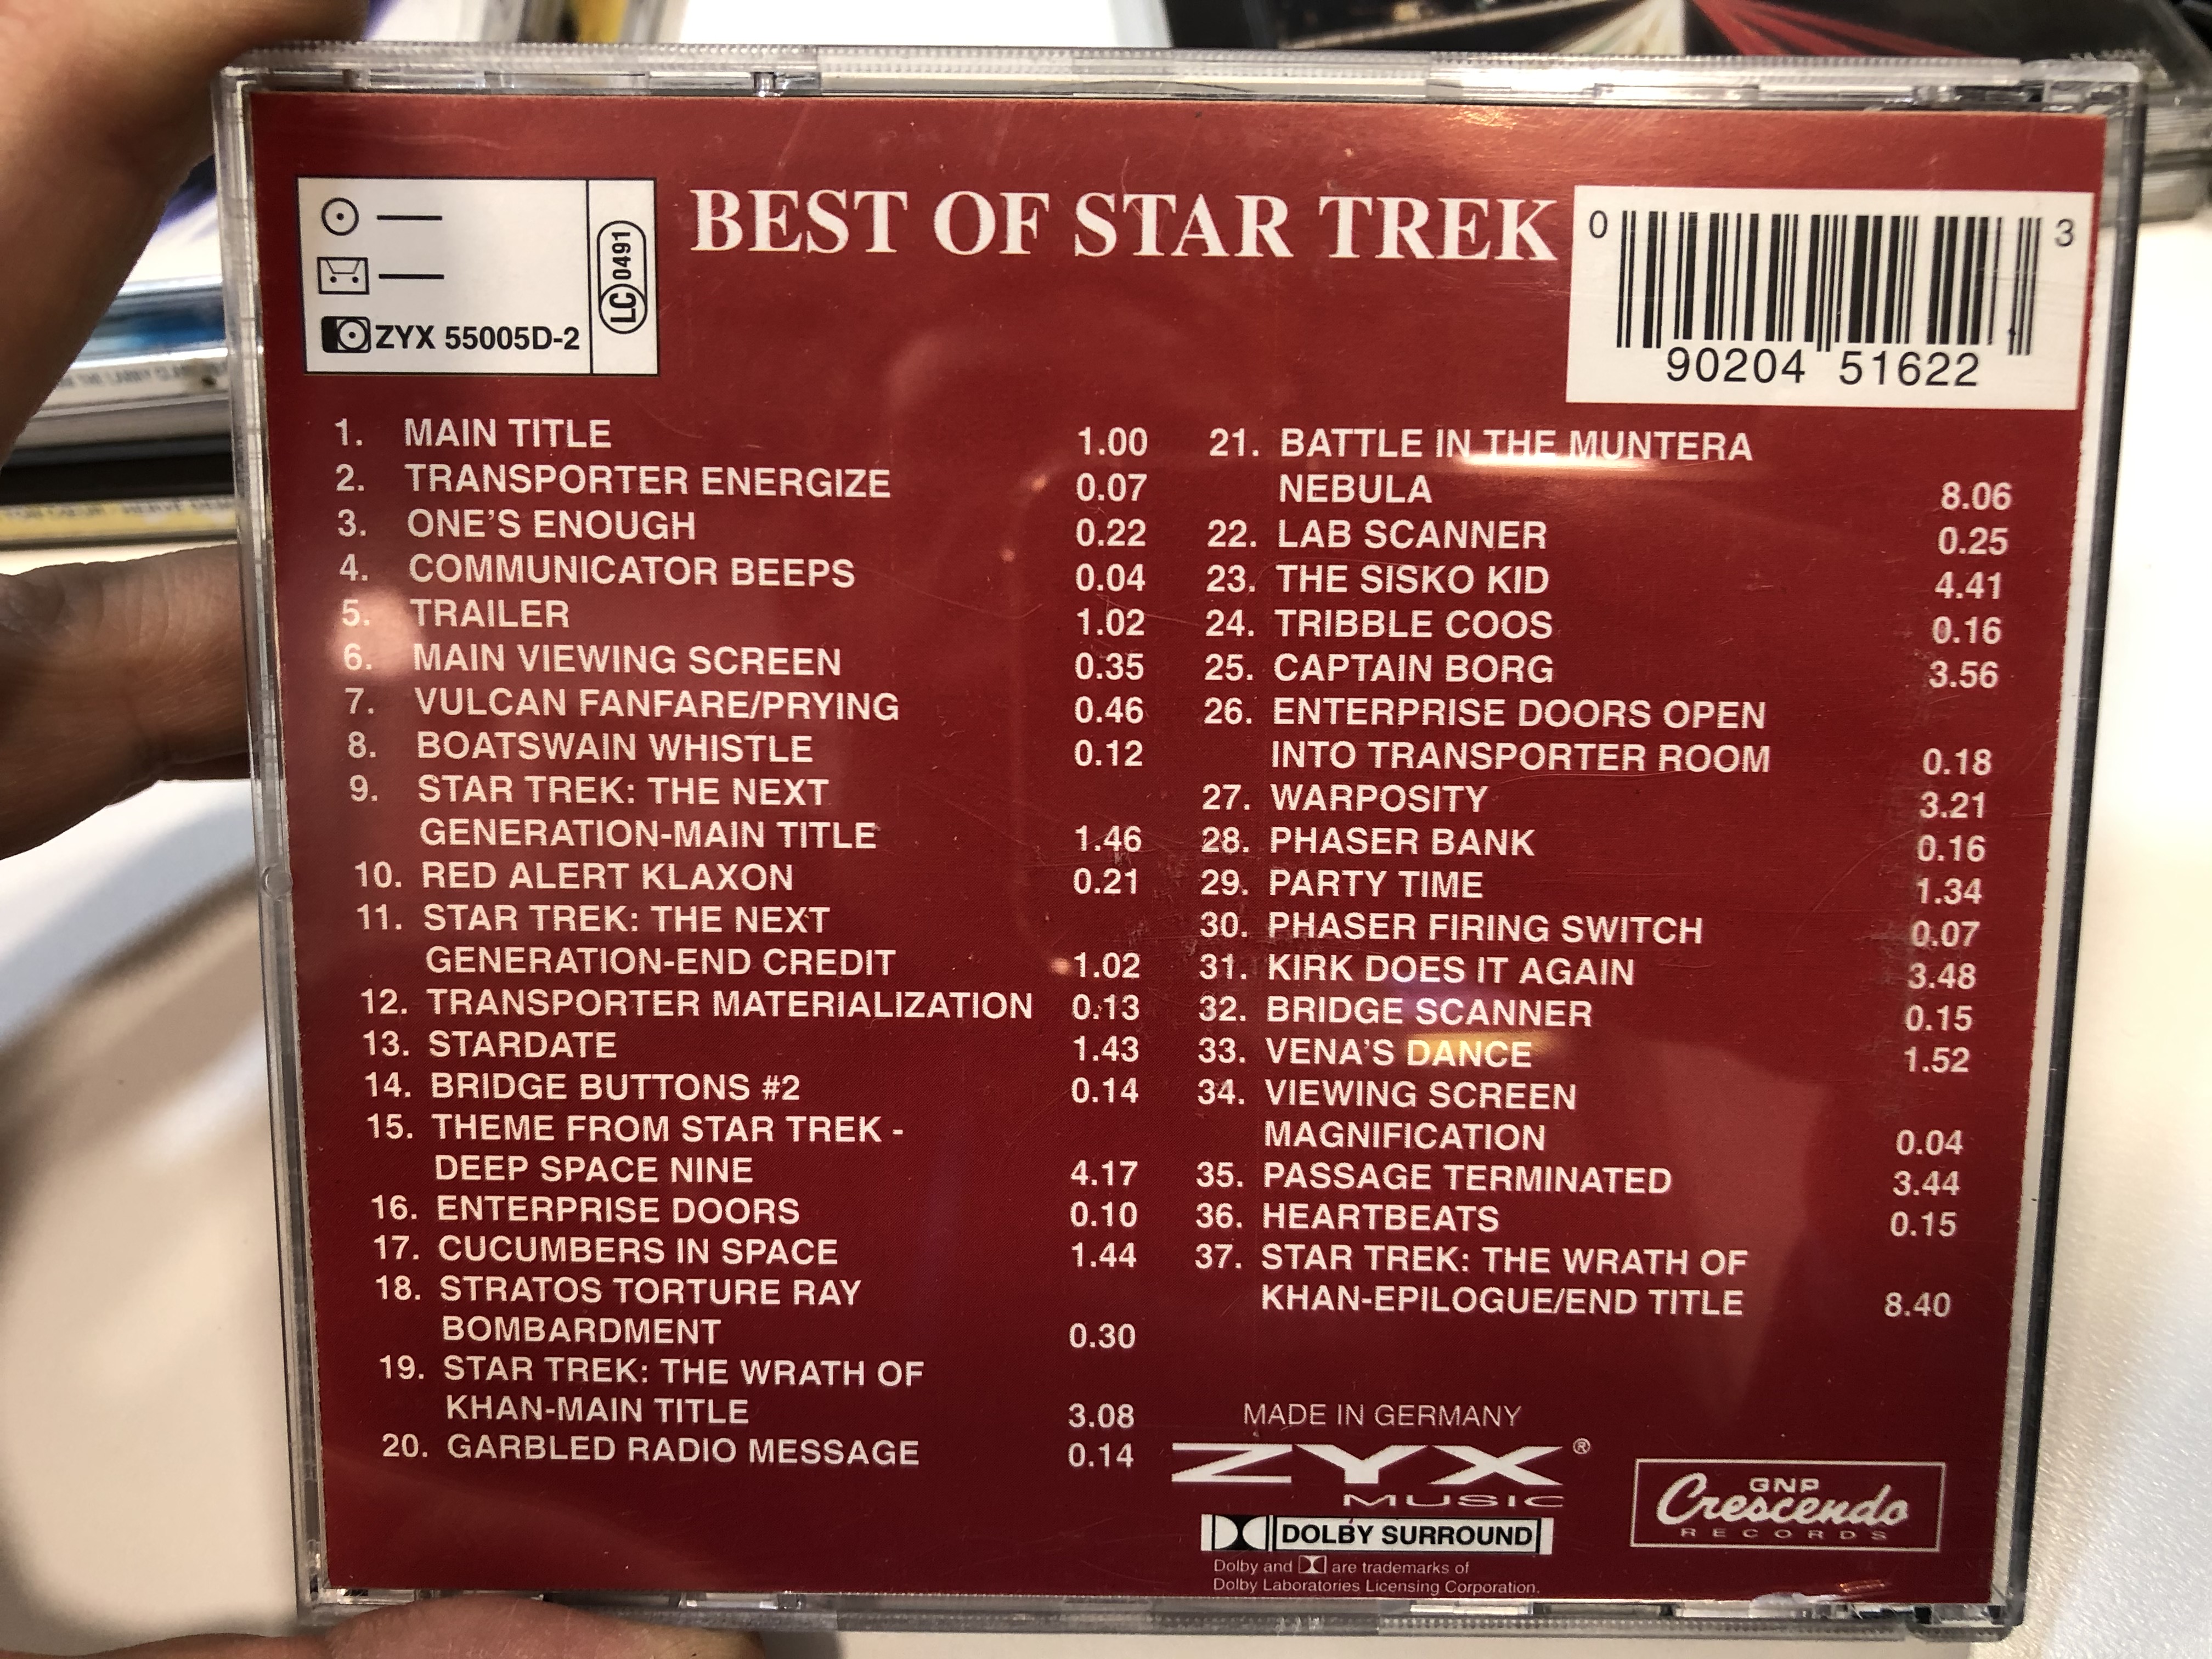 best-of-star-trek-music-from-original-tv-series-and-motion-picture-zyx-music-audio-cd-zyx-55005d-2-2-.jpg